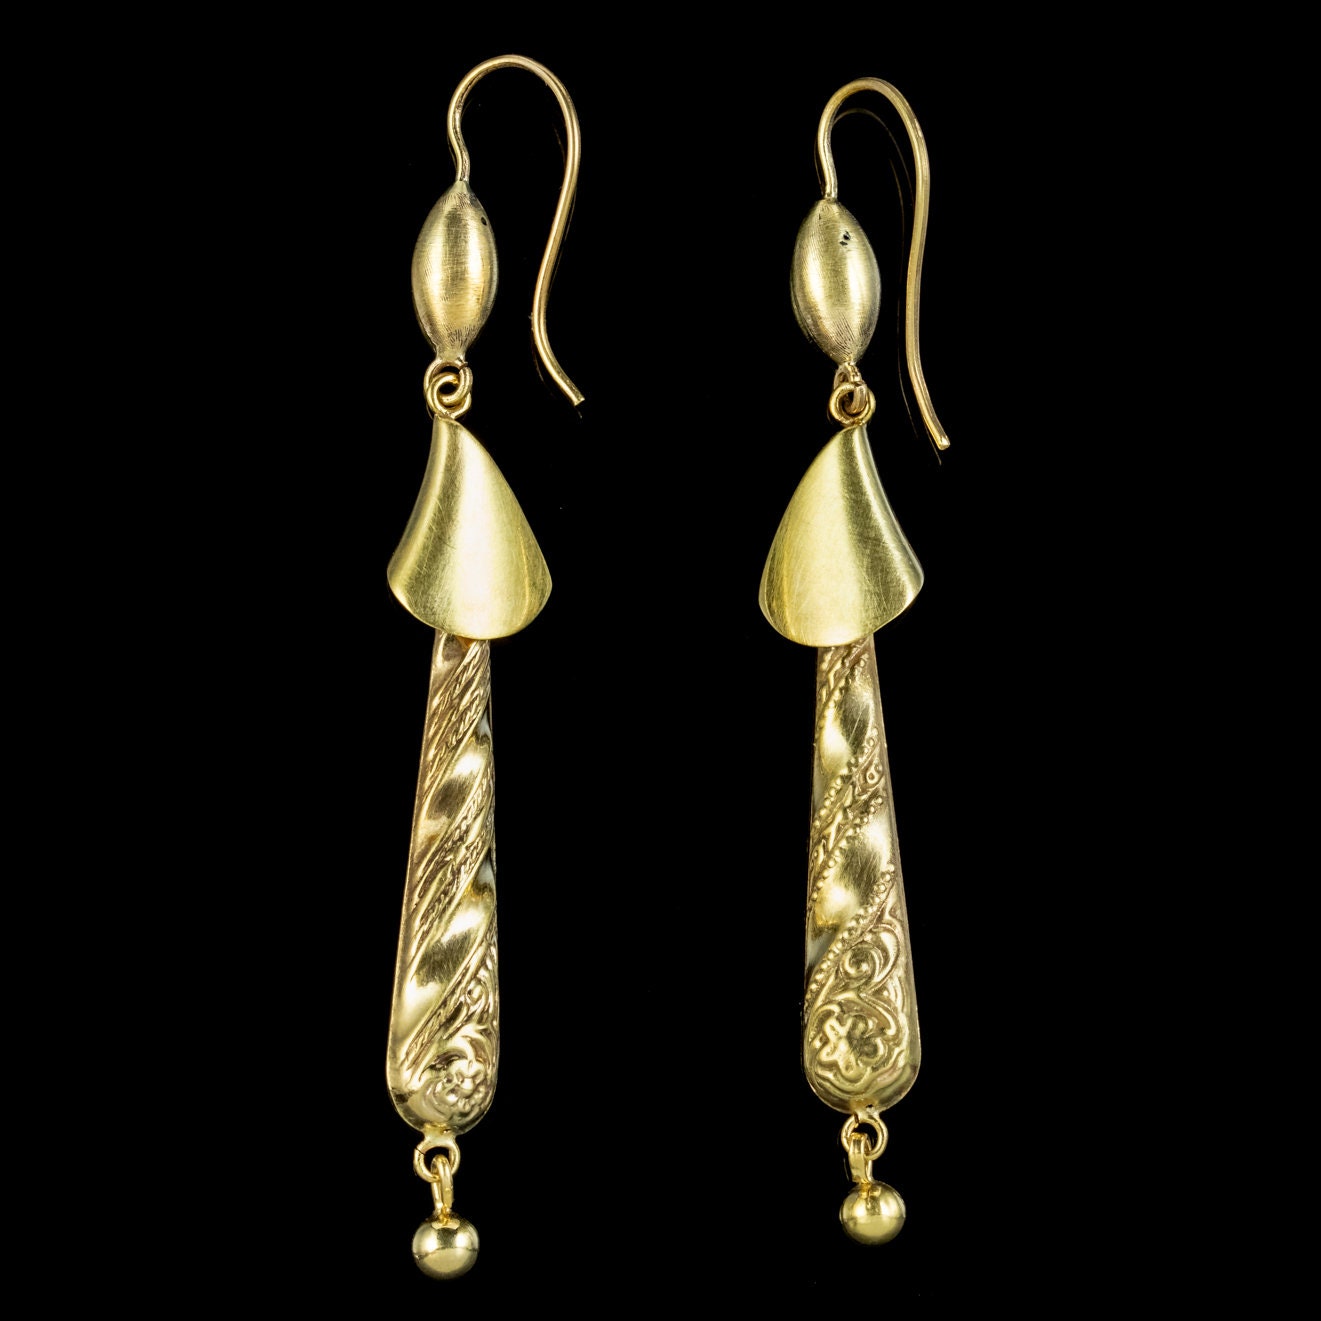 Antique Victorian Drop Earrings 15ct Gold Circa 1880 - Etsy UK